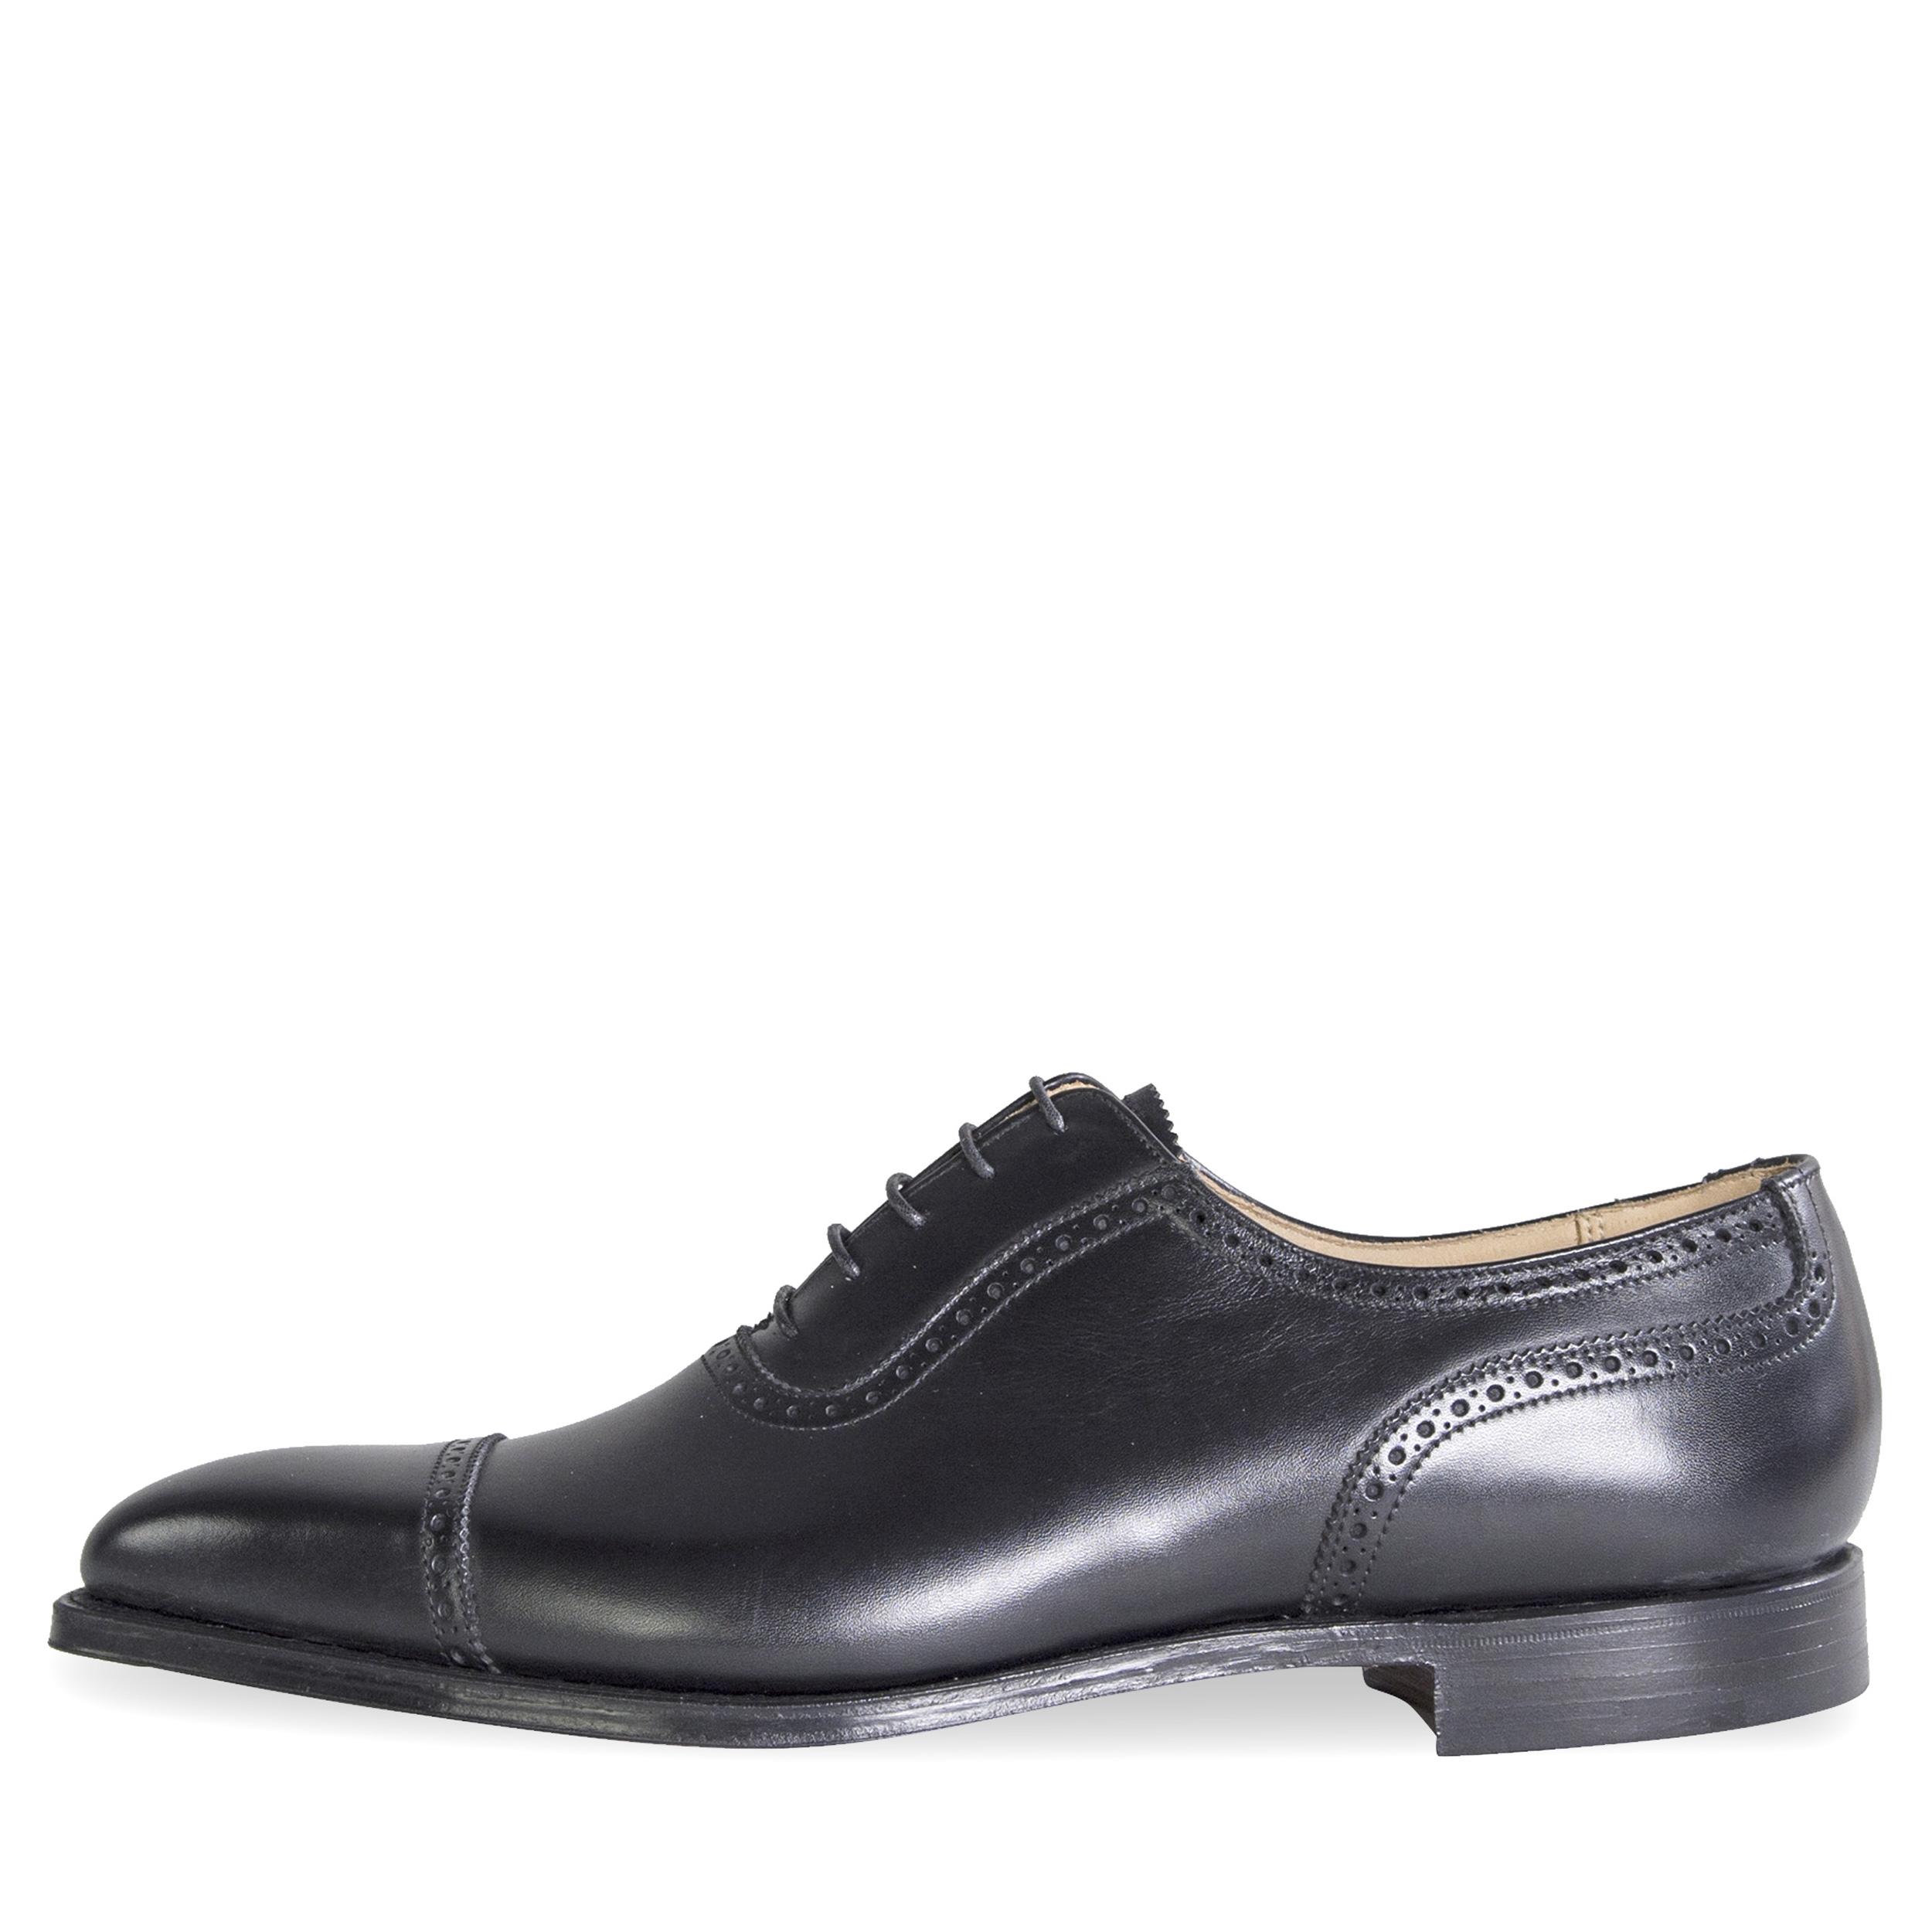 Crockett and Jones 'westbourne' Calf Leather Punched Toe Cap Shoes ...